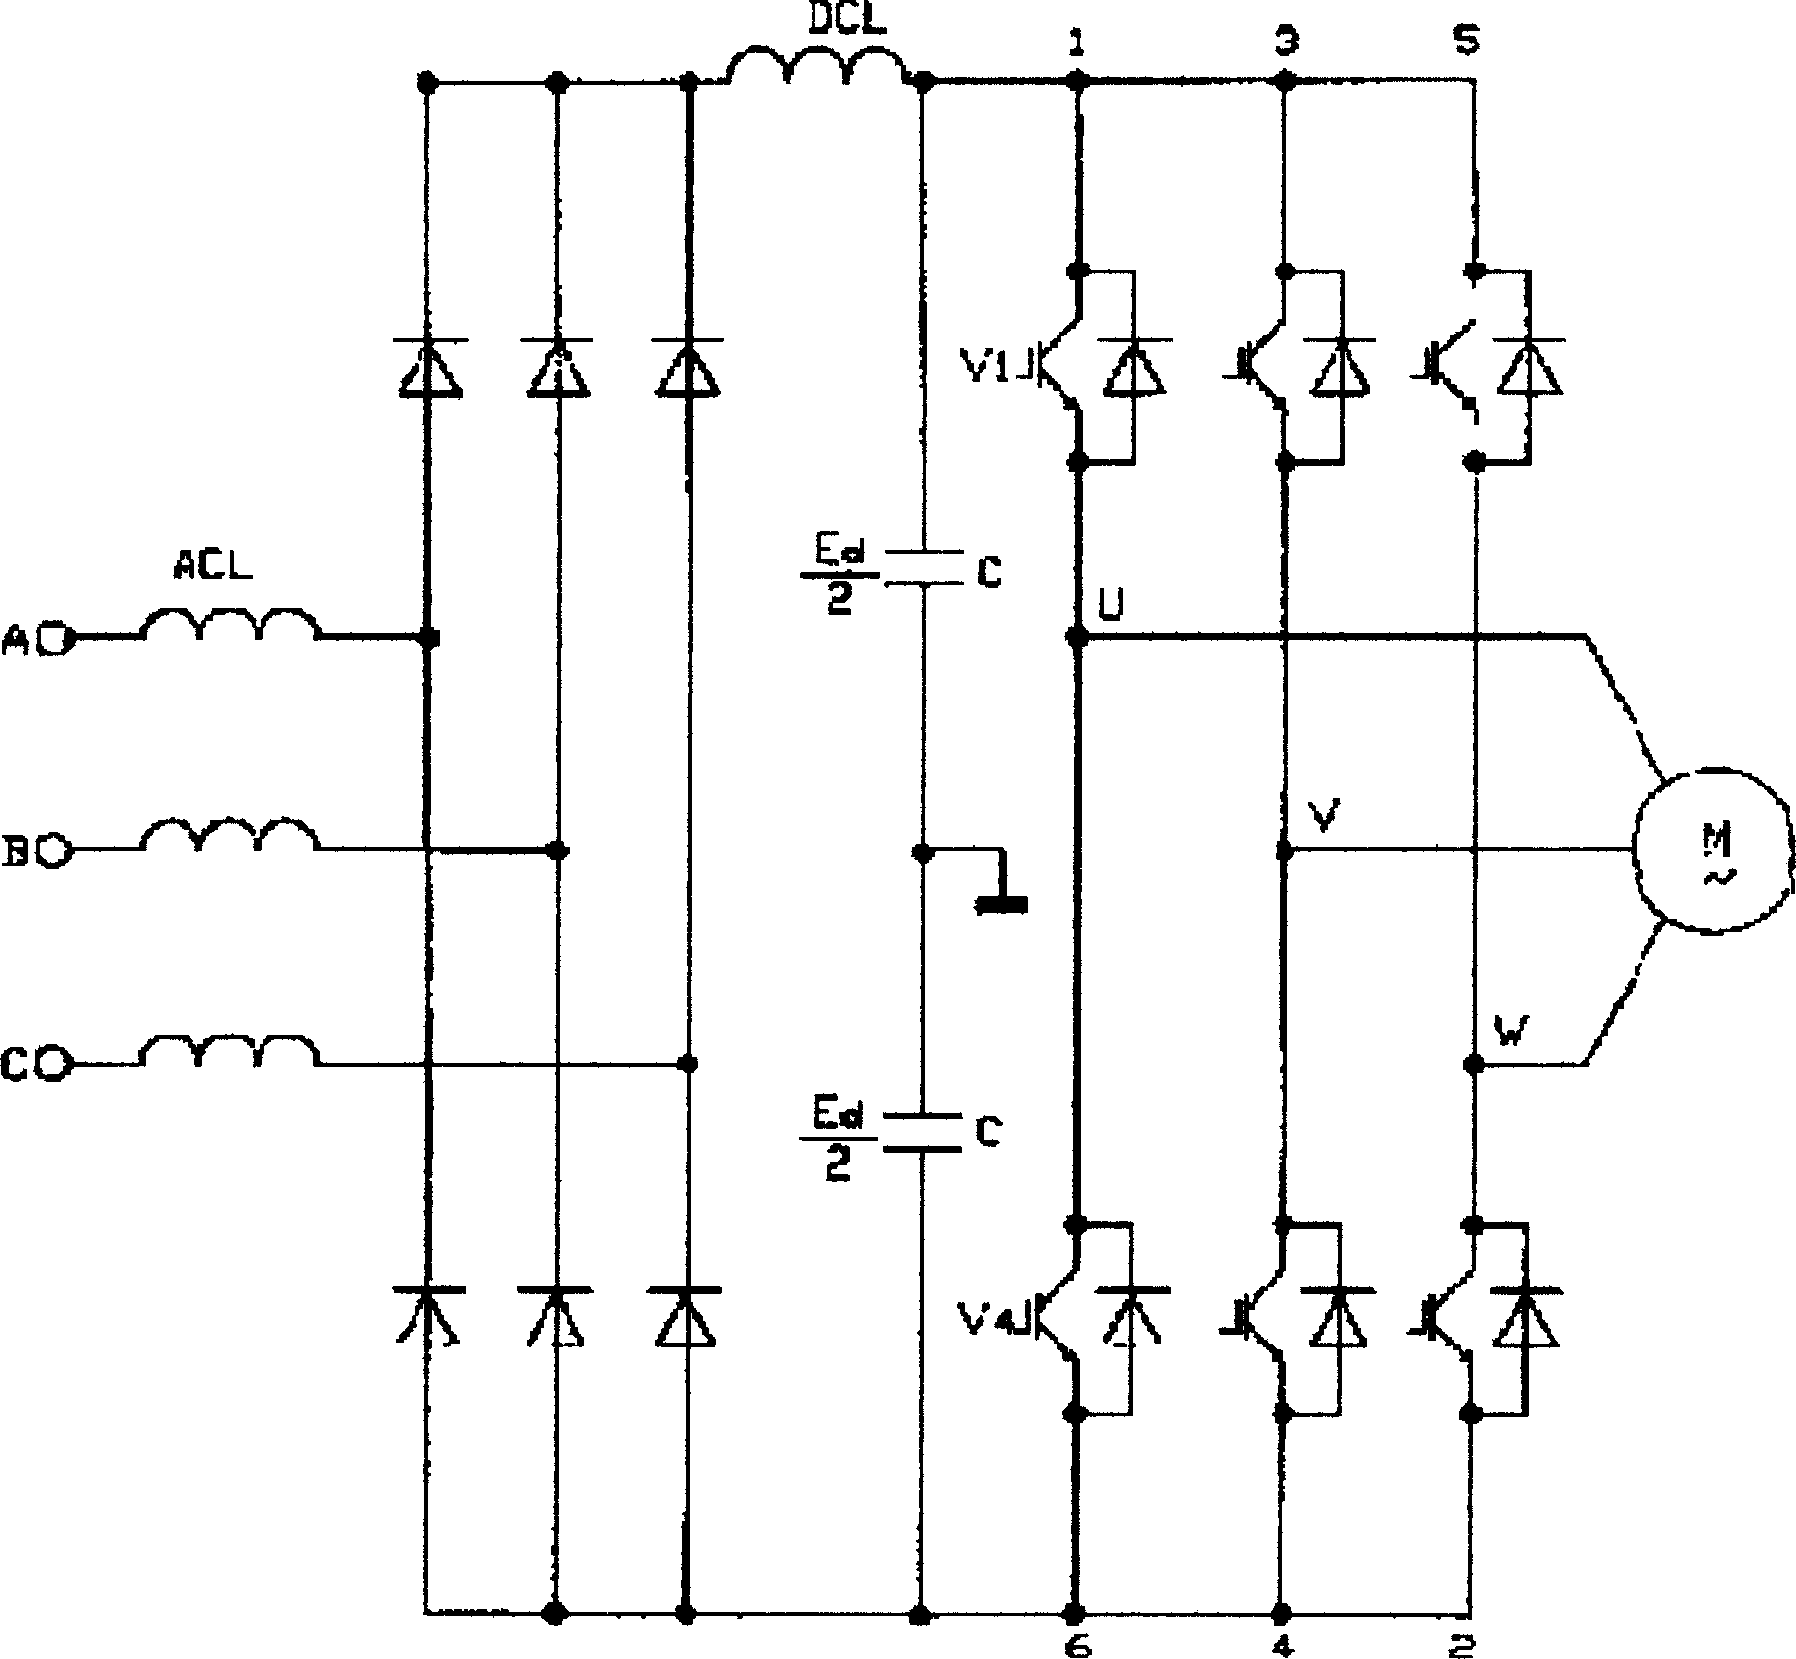 Three-phase split phase-shifting transformer for high-voltage frequency conversion and its use